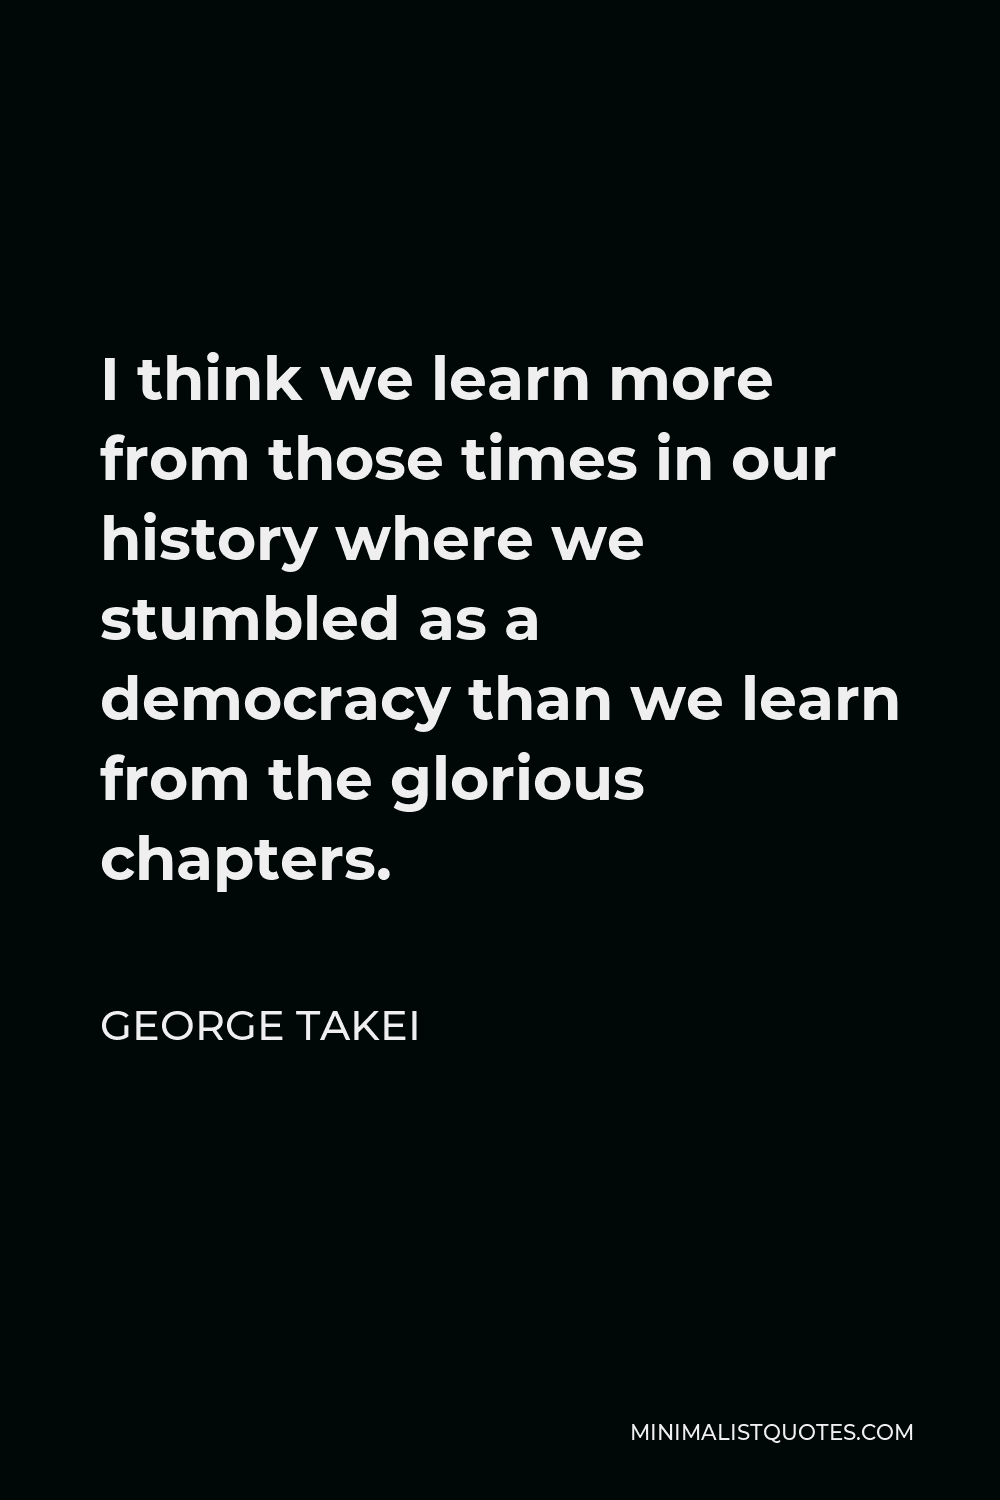 George Takei Quote - I think we learn more from those times in our history where we stumbled as a democracy than we learn from the glorious chapters.